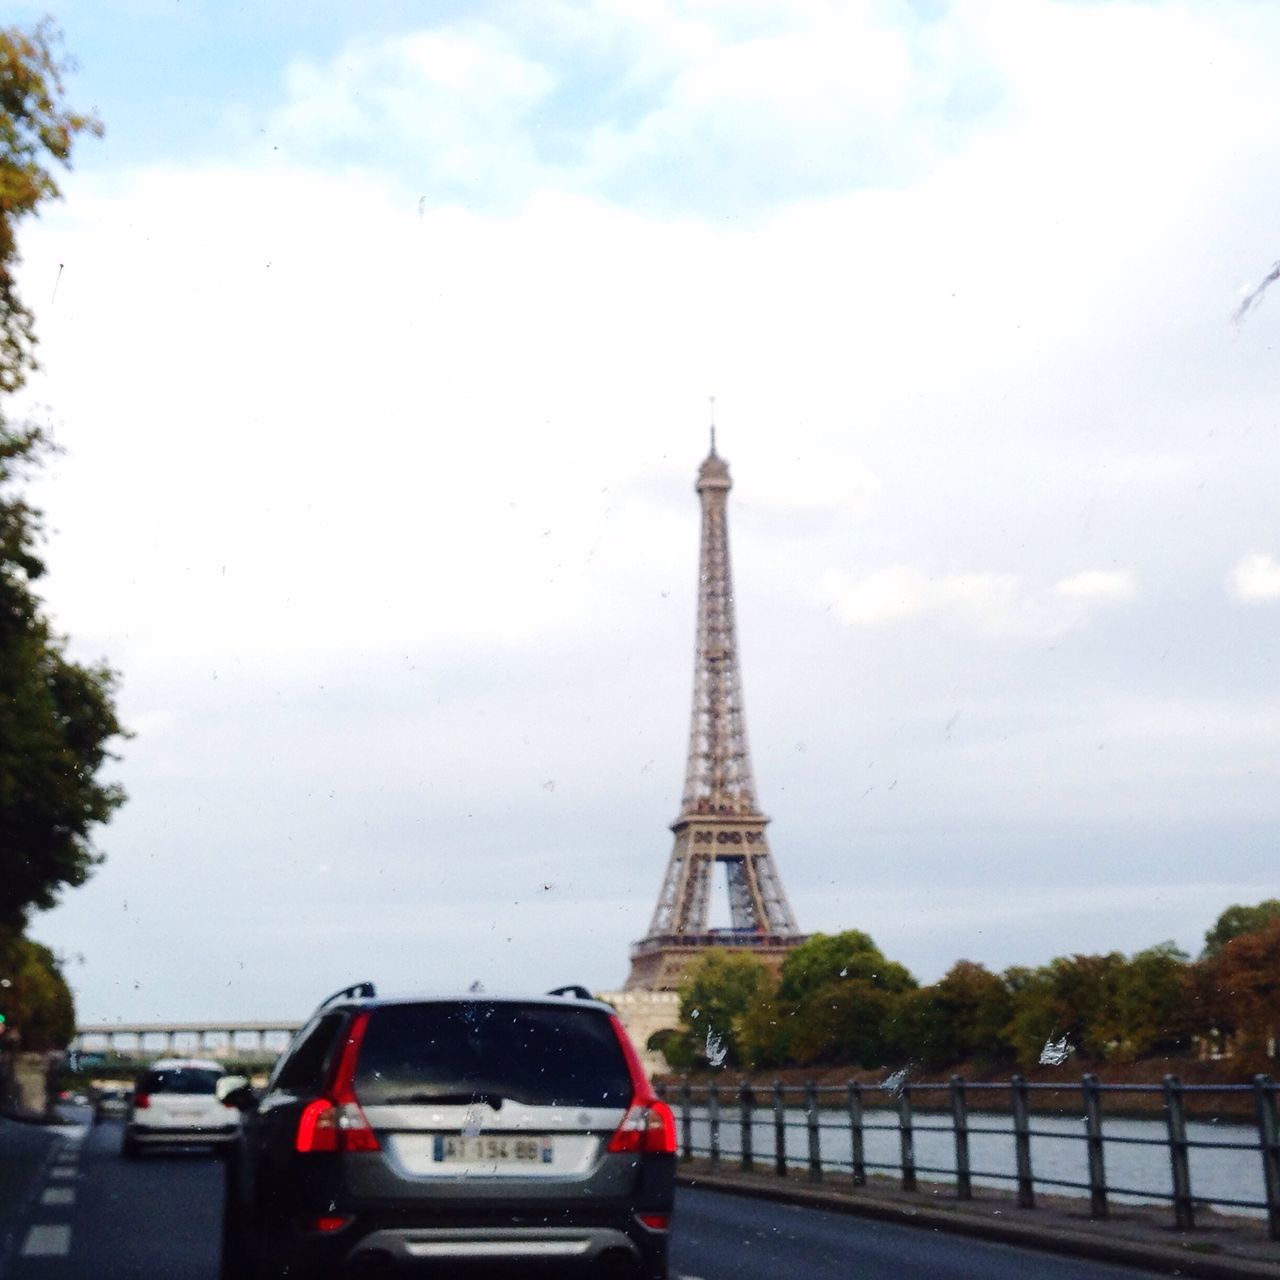 transportation, eiffel tower, sky, built structure, architecture, car, tower, tree, famous place, travel destinations, road, travel, land vehicle, international landmark, metal, tourism, capital cities, tall - high, cloud - sky, mode of transport